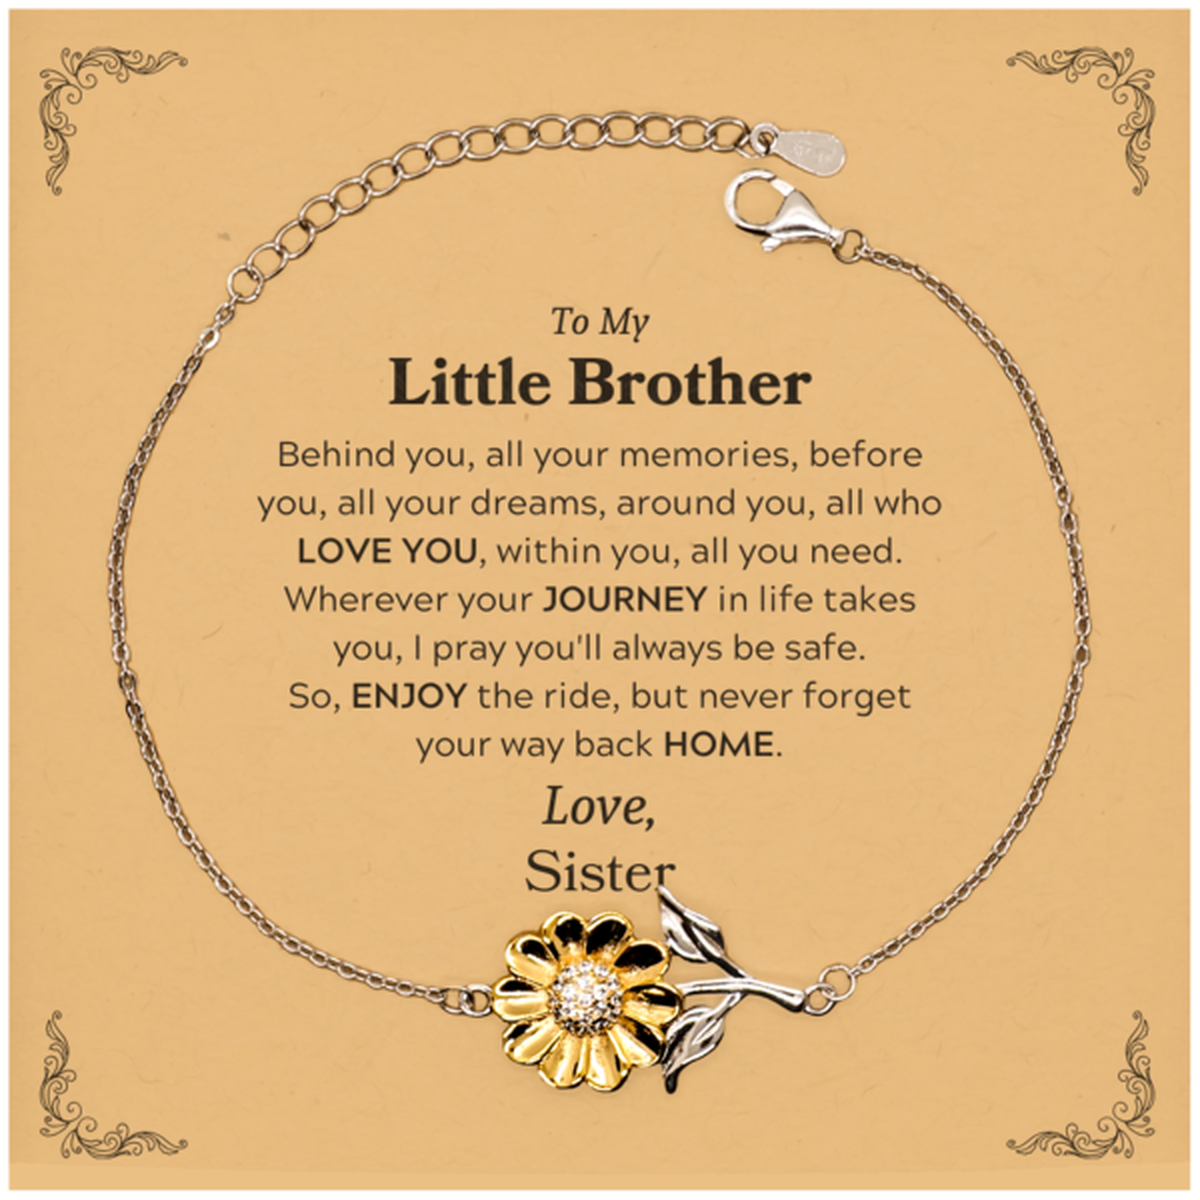 To My Little Brother Graduation Gifts from Sister, Little Brother Sunflower Bracelet Christmas Birthday Gifts for Little Brother Behind you, all your memories, before you, all your dreams. Love, Sister